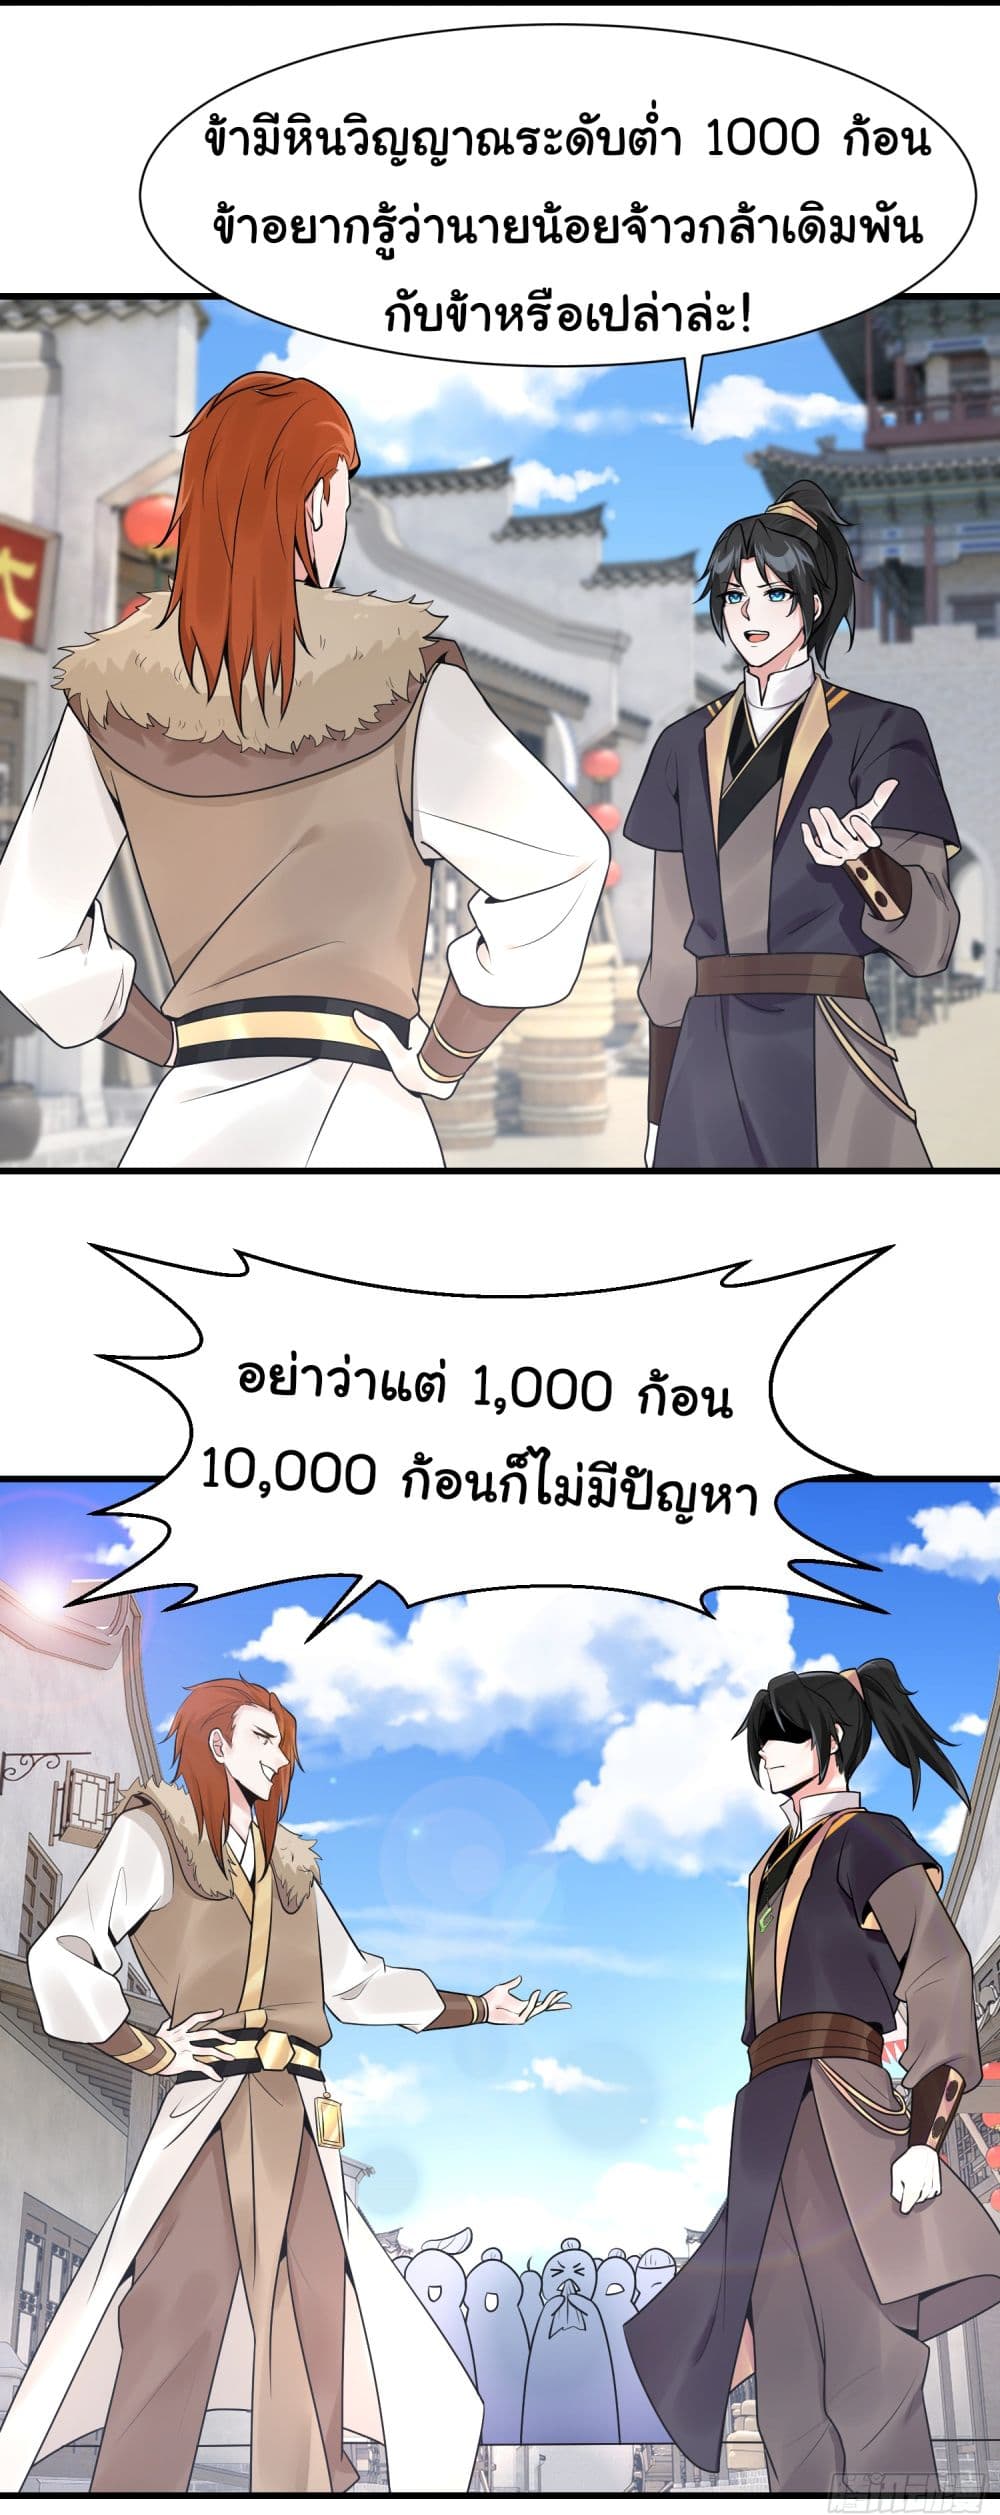 Rebirth of an Immortal Cultivator from 10,000 years ago ตอนที่ 9 (14)